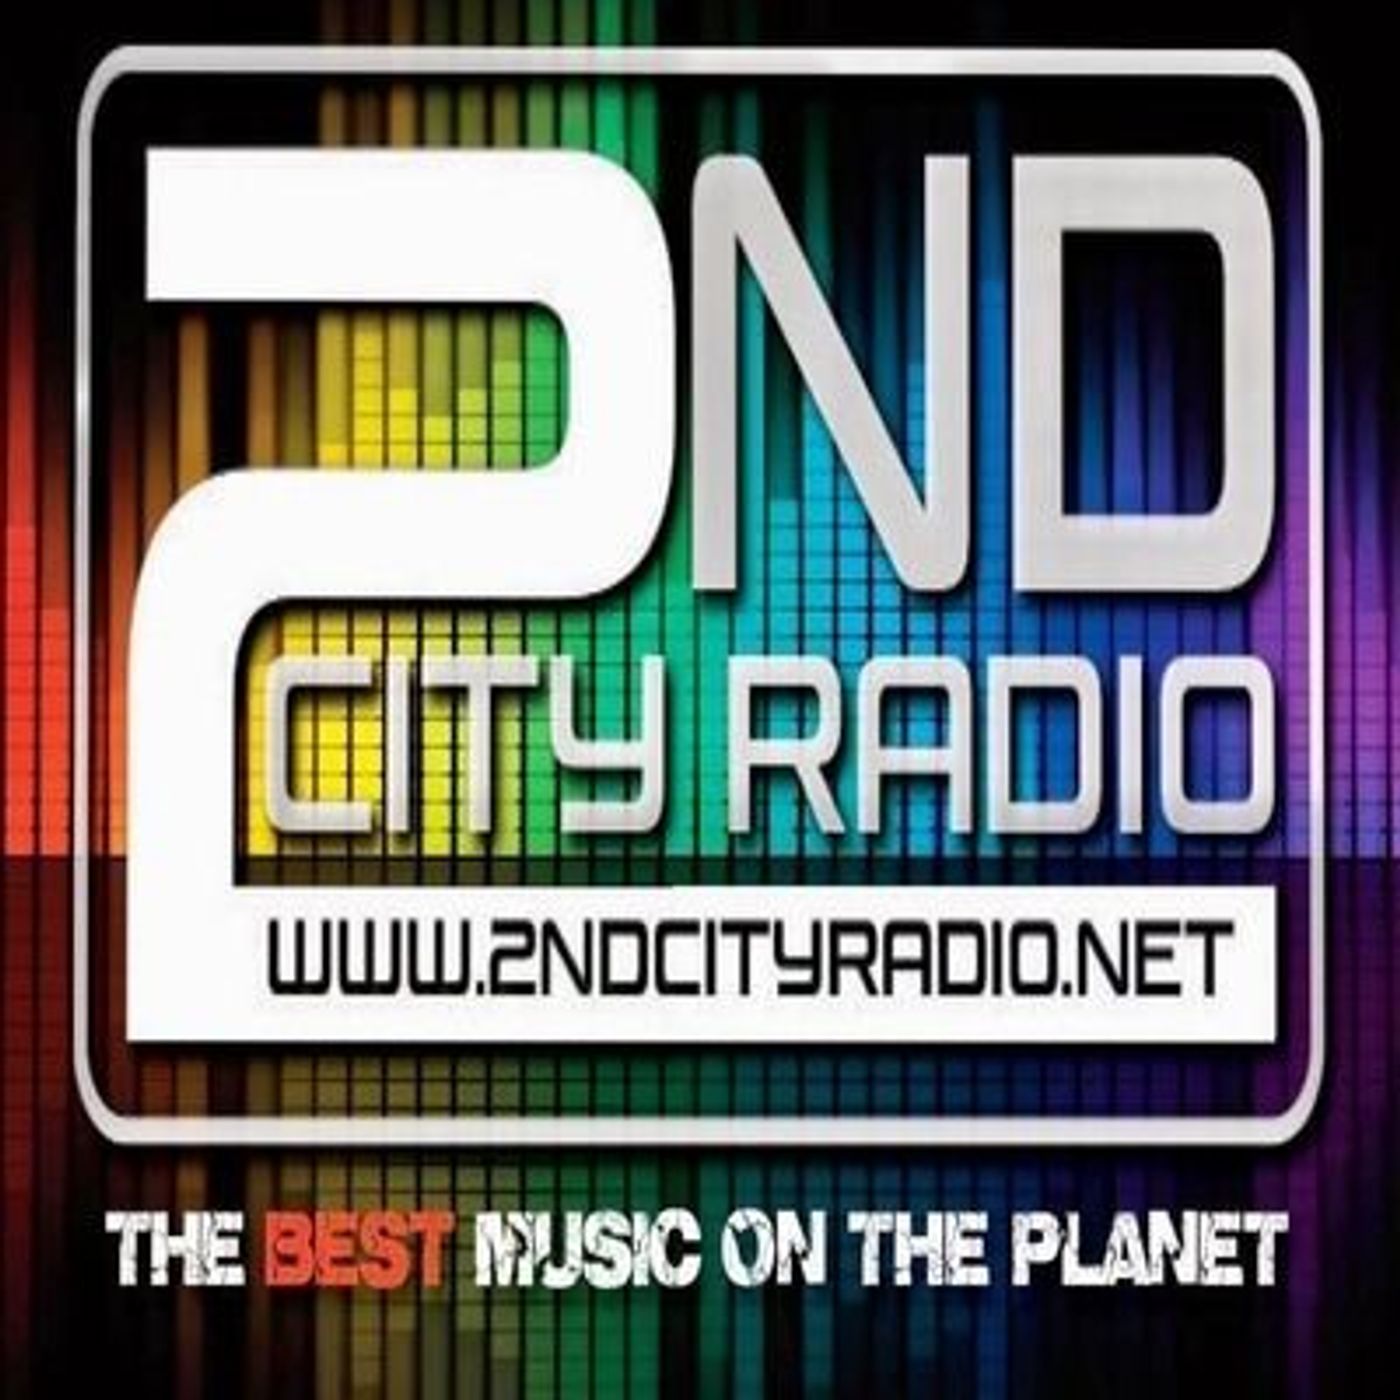 Monday the 2nd of May 2022 on 2ndcity Radio with Classic Chat